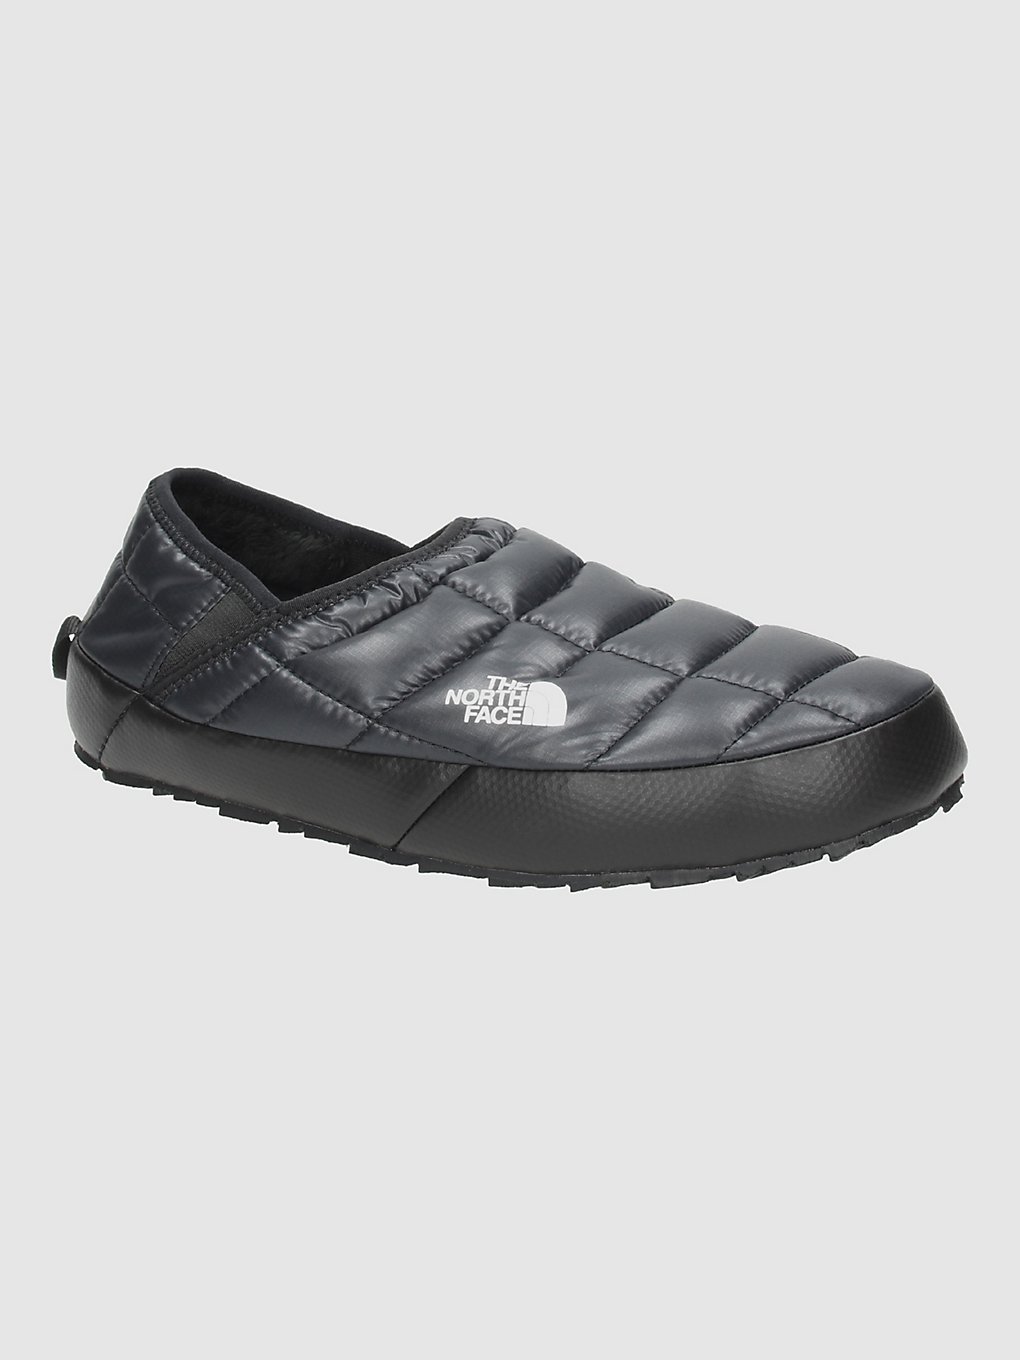 THE NORTH FACE Thermoball Traction Mule V Slip-ons noir